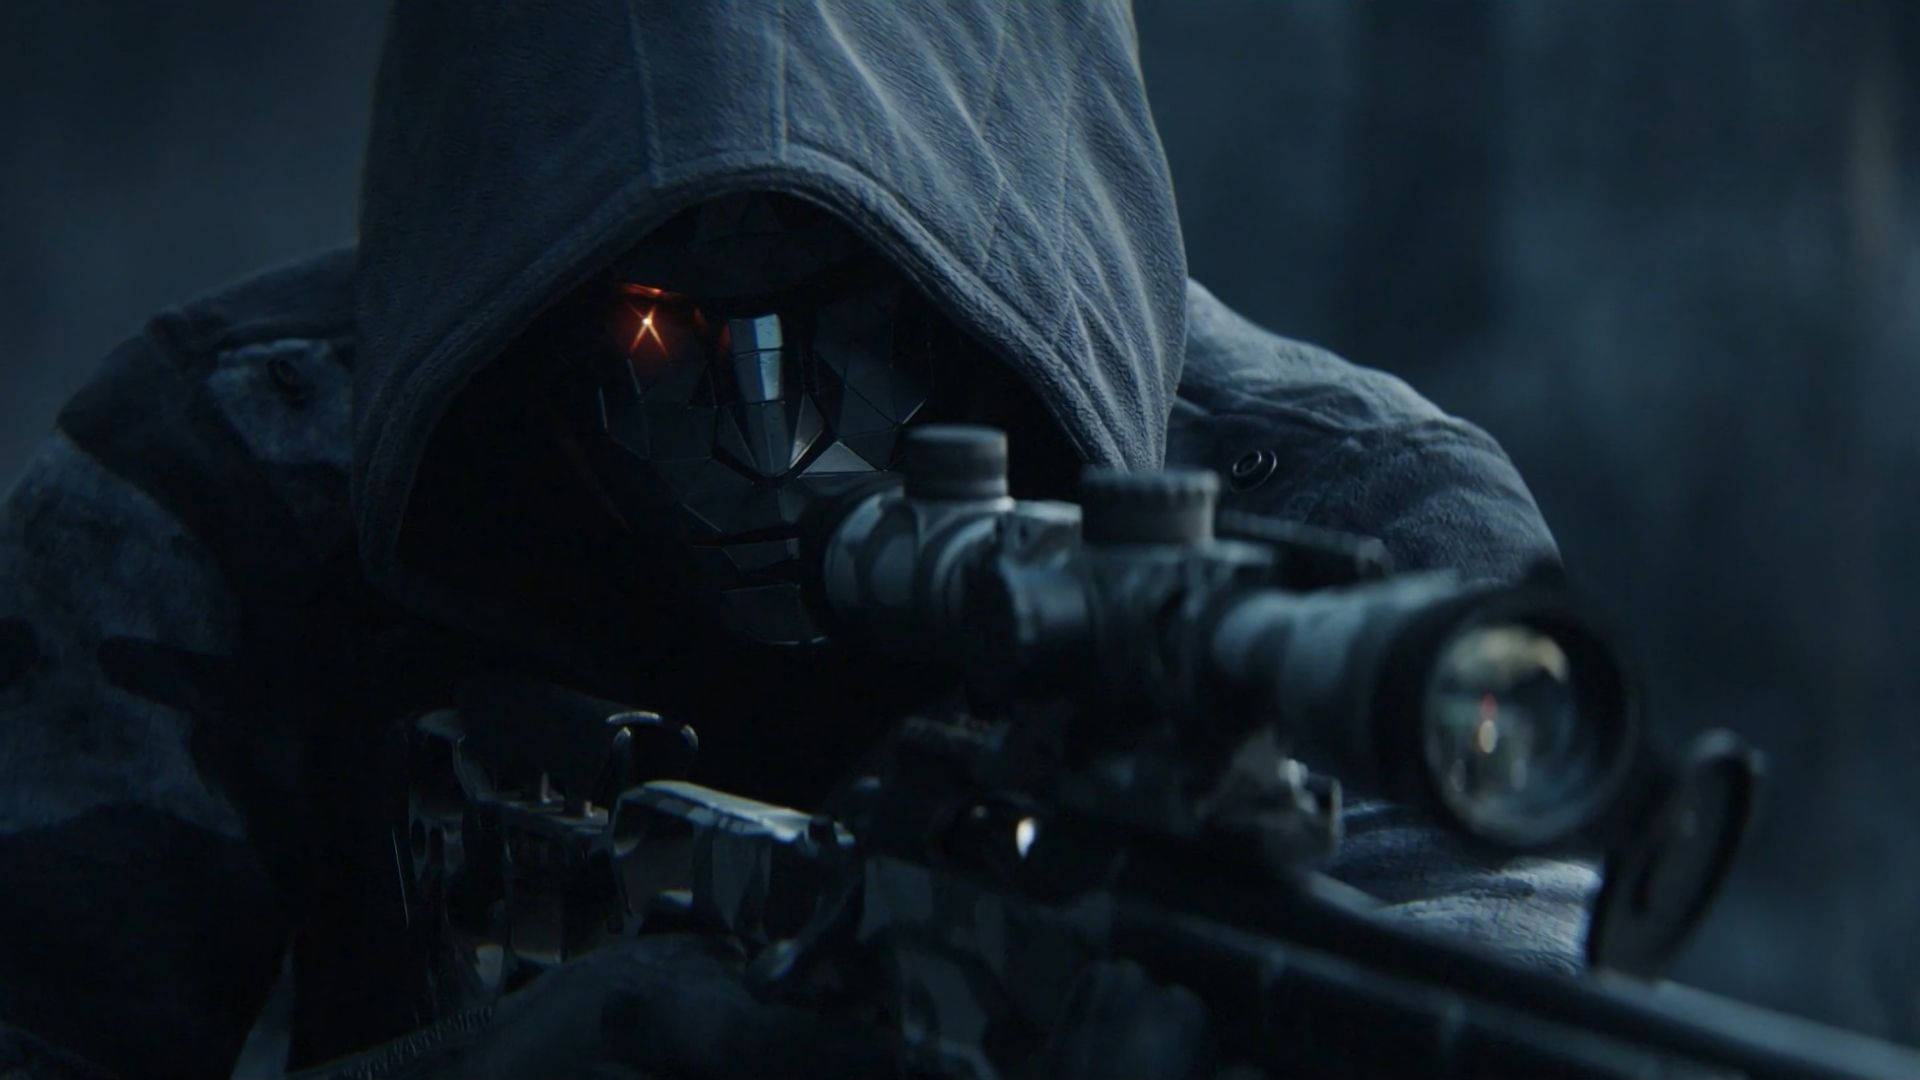 329992 Sci-Fi, Soldier, Sniper, Rifle, 4k - Rare Gallery HD Wallpapers